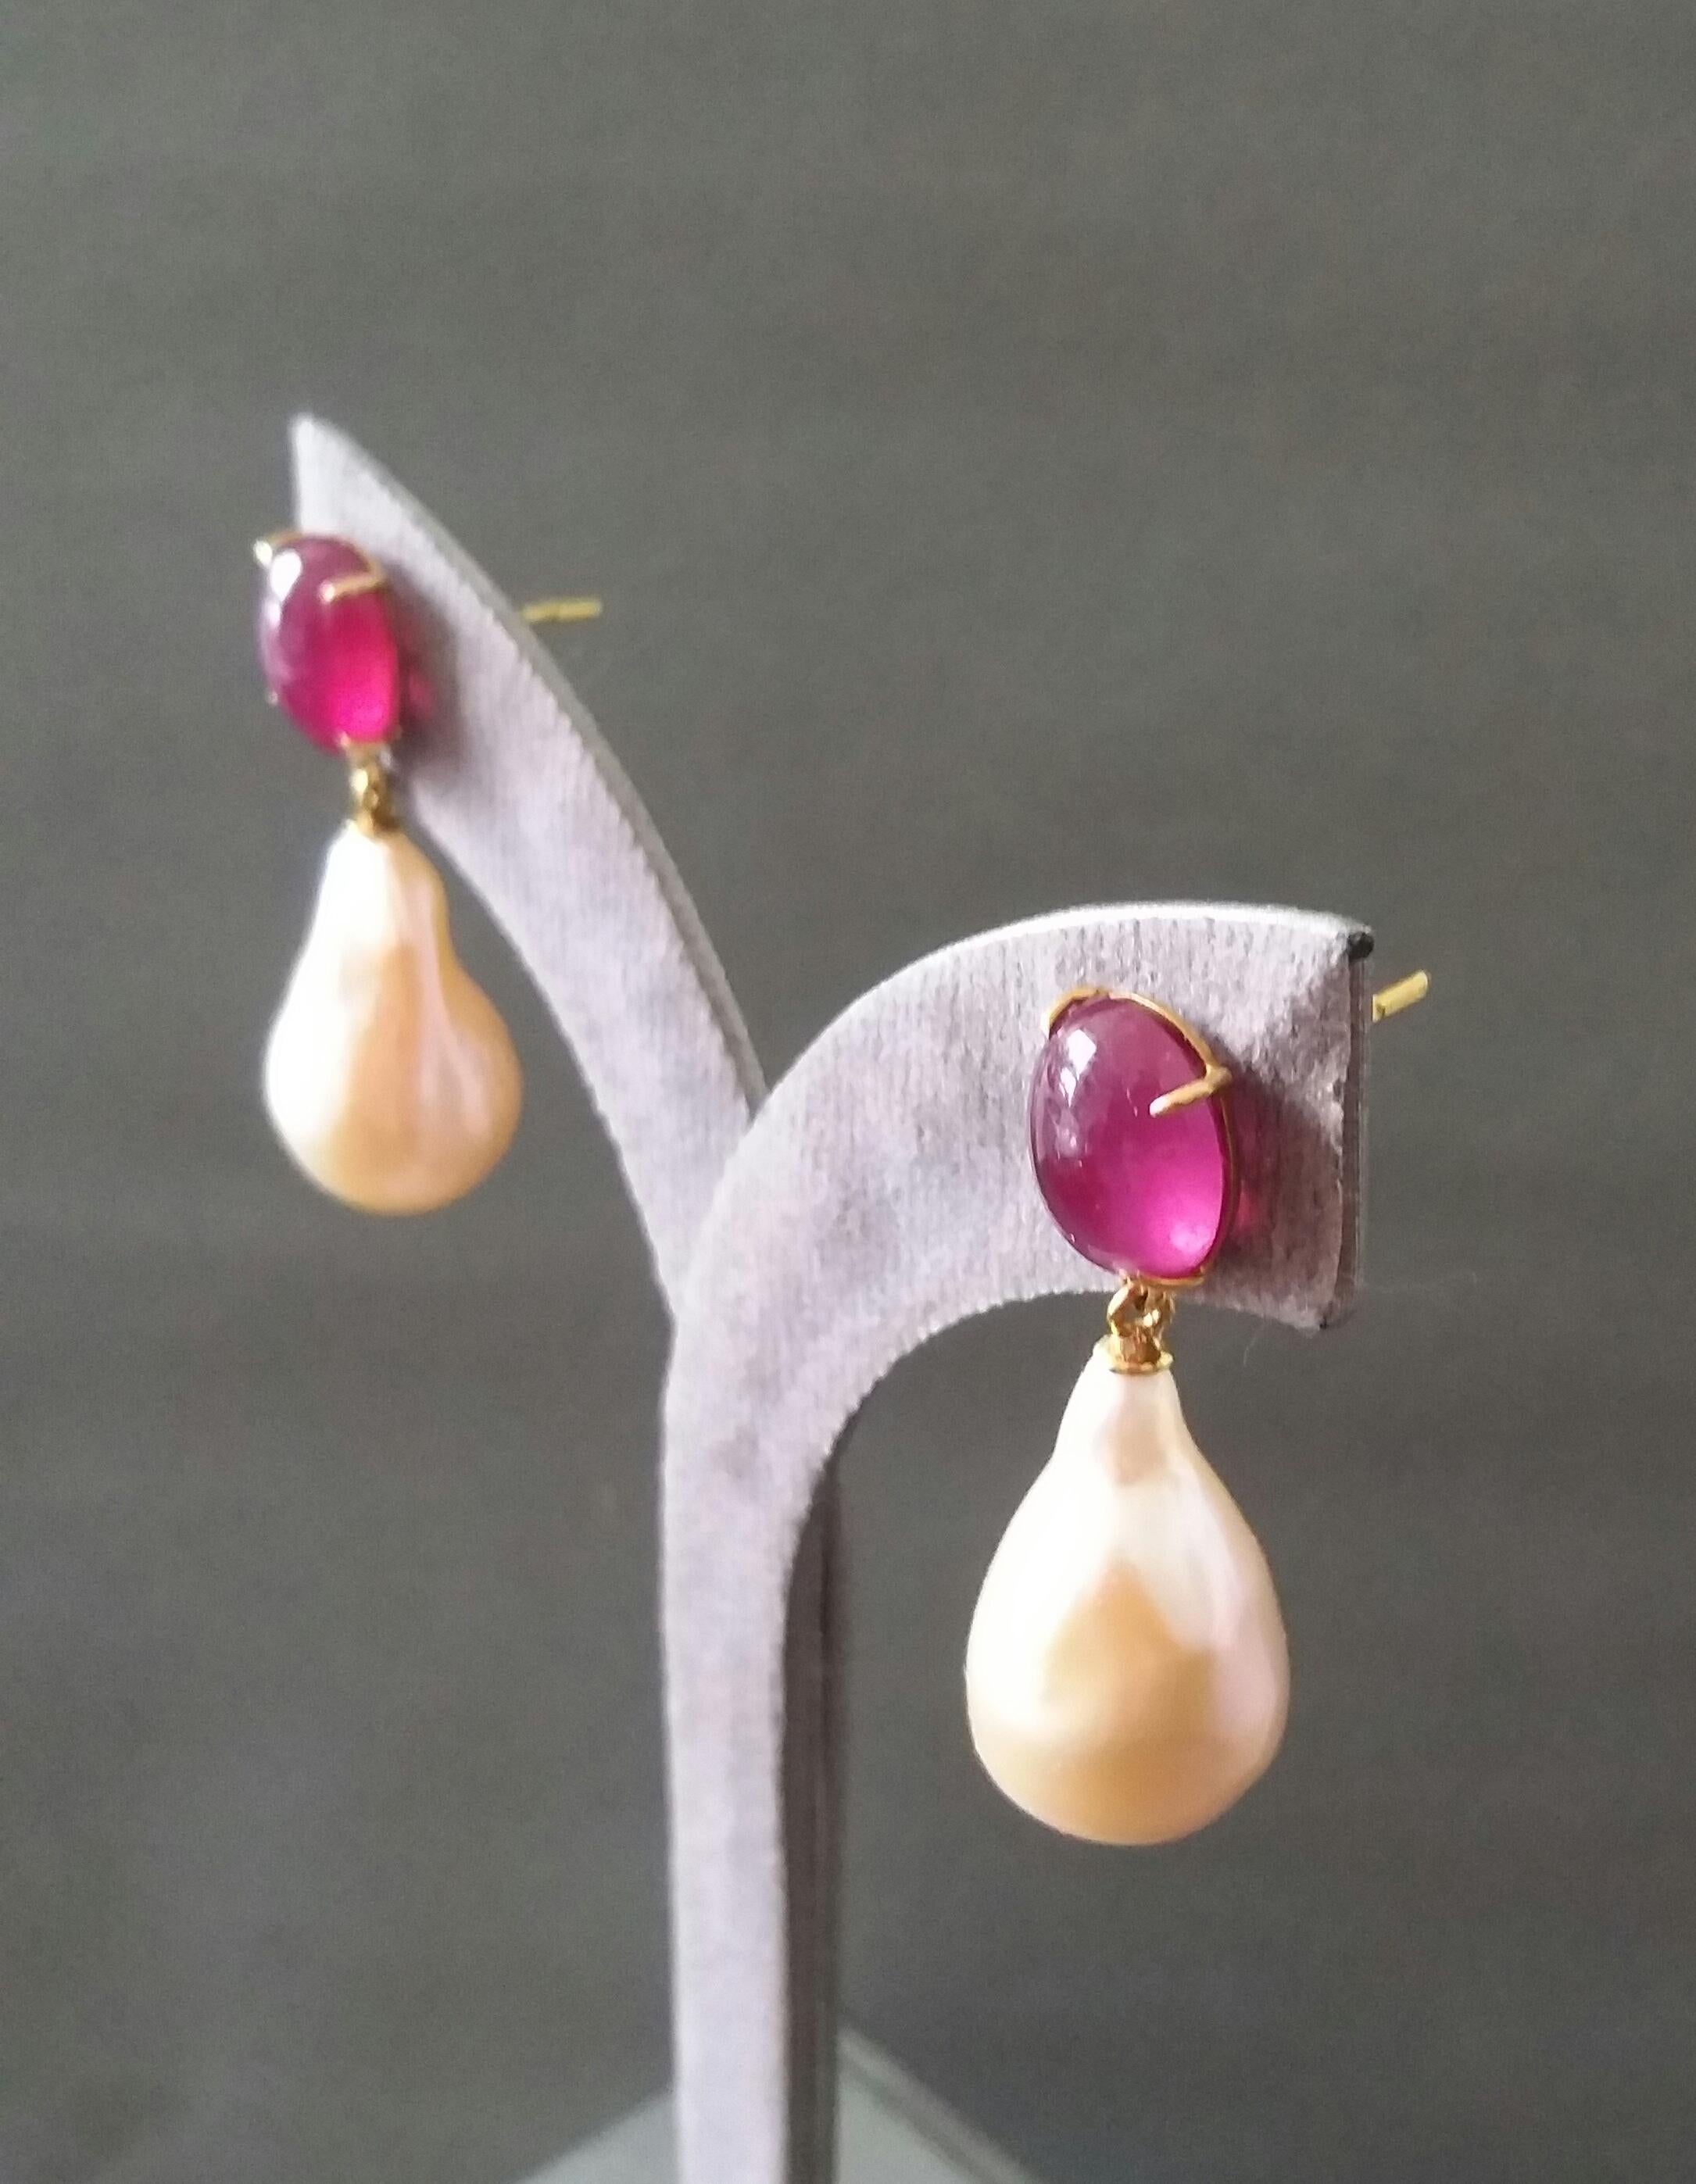 Big Size Pear Shape Cream Color Pearls Oval Ruby Cabochon 14 Karat Gold Earrings For Sale 1